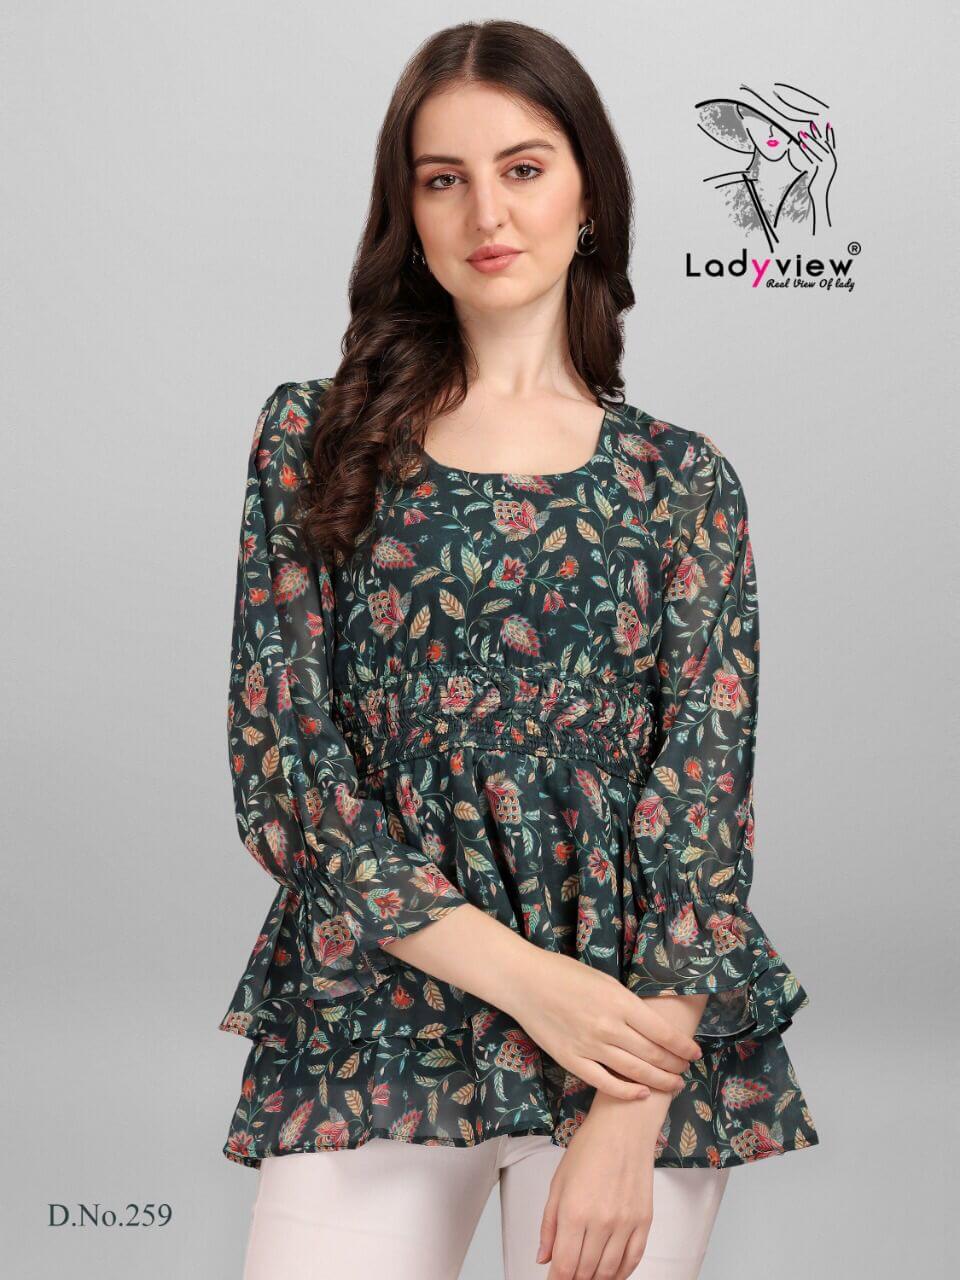 Ladyview Gorgeous Georgette Tops Catalog in Wholesale, Buy Ladyview Gorgeous Georgette Tops Full Catalog in Wholesale Price Online From Vadodara, Surat, Ahmedabad